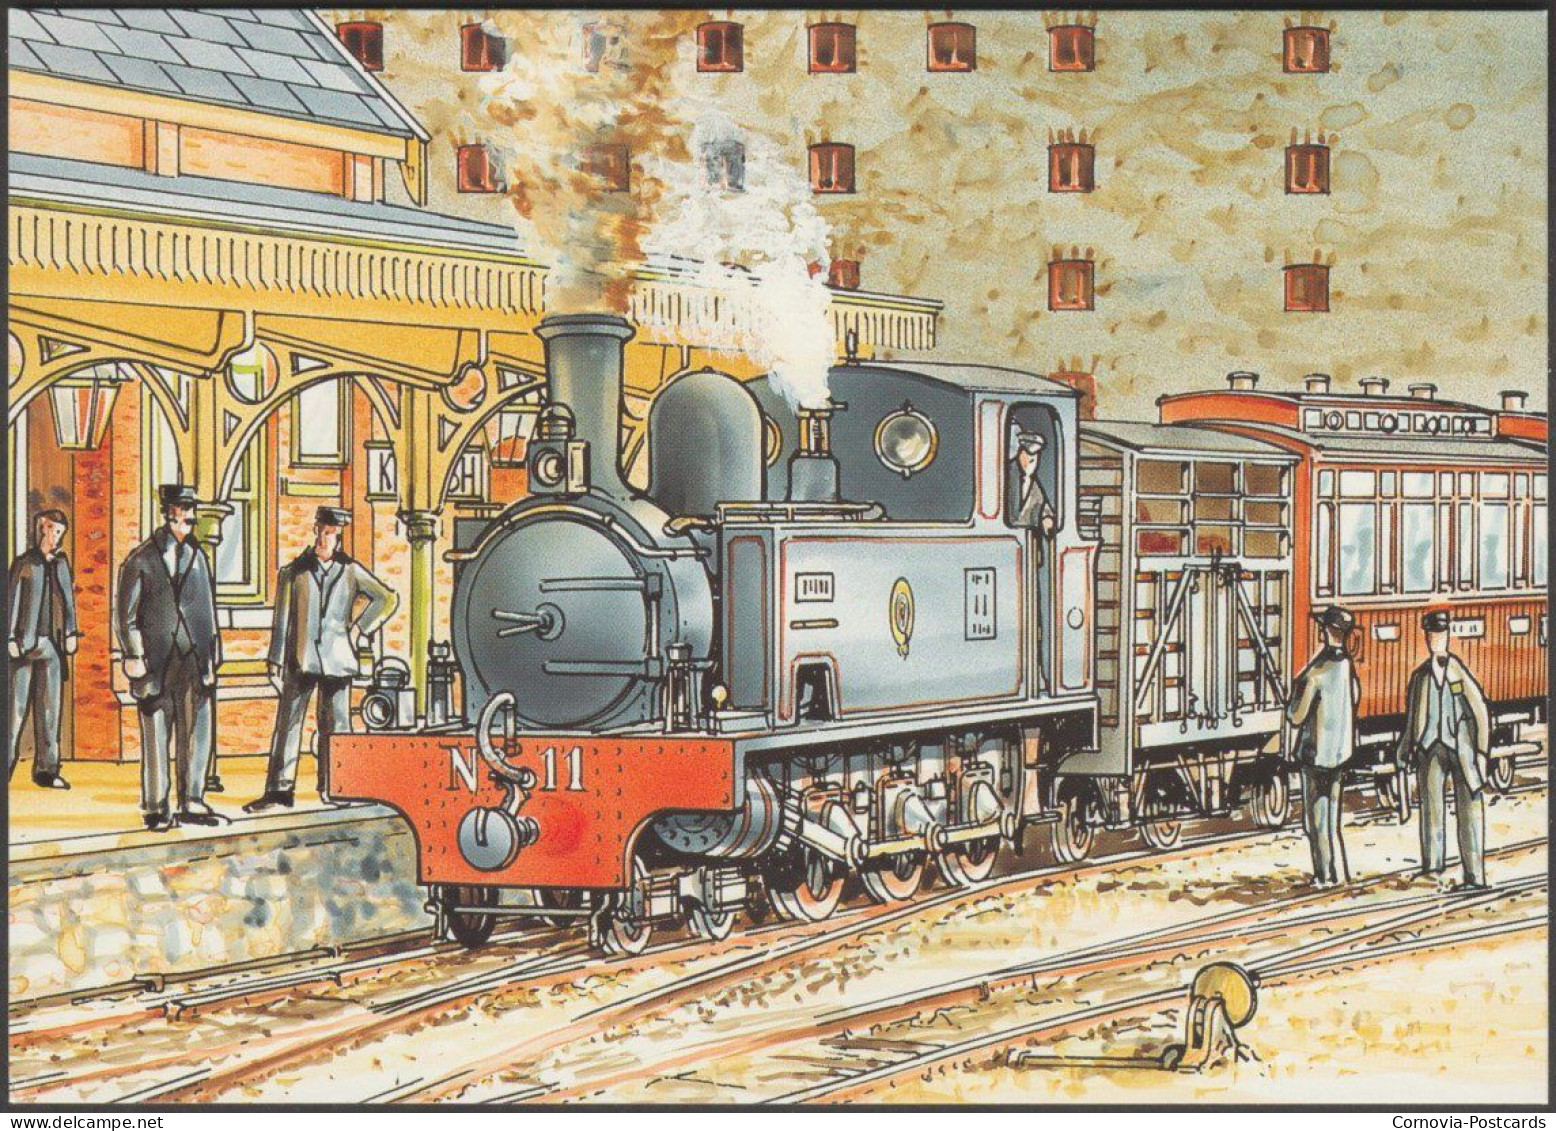 West Clare Railway By Charles Rycraft, 28p Stamp, 1995 - An Post Maximum Card - Cartes-maximum